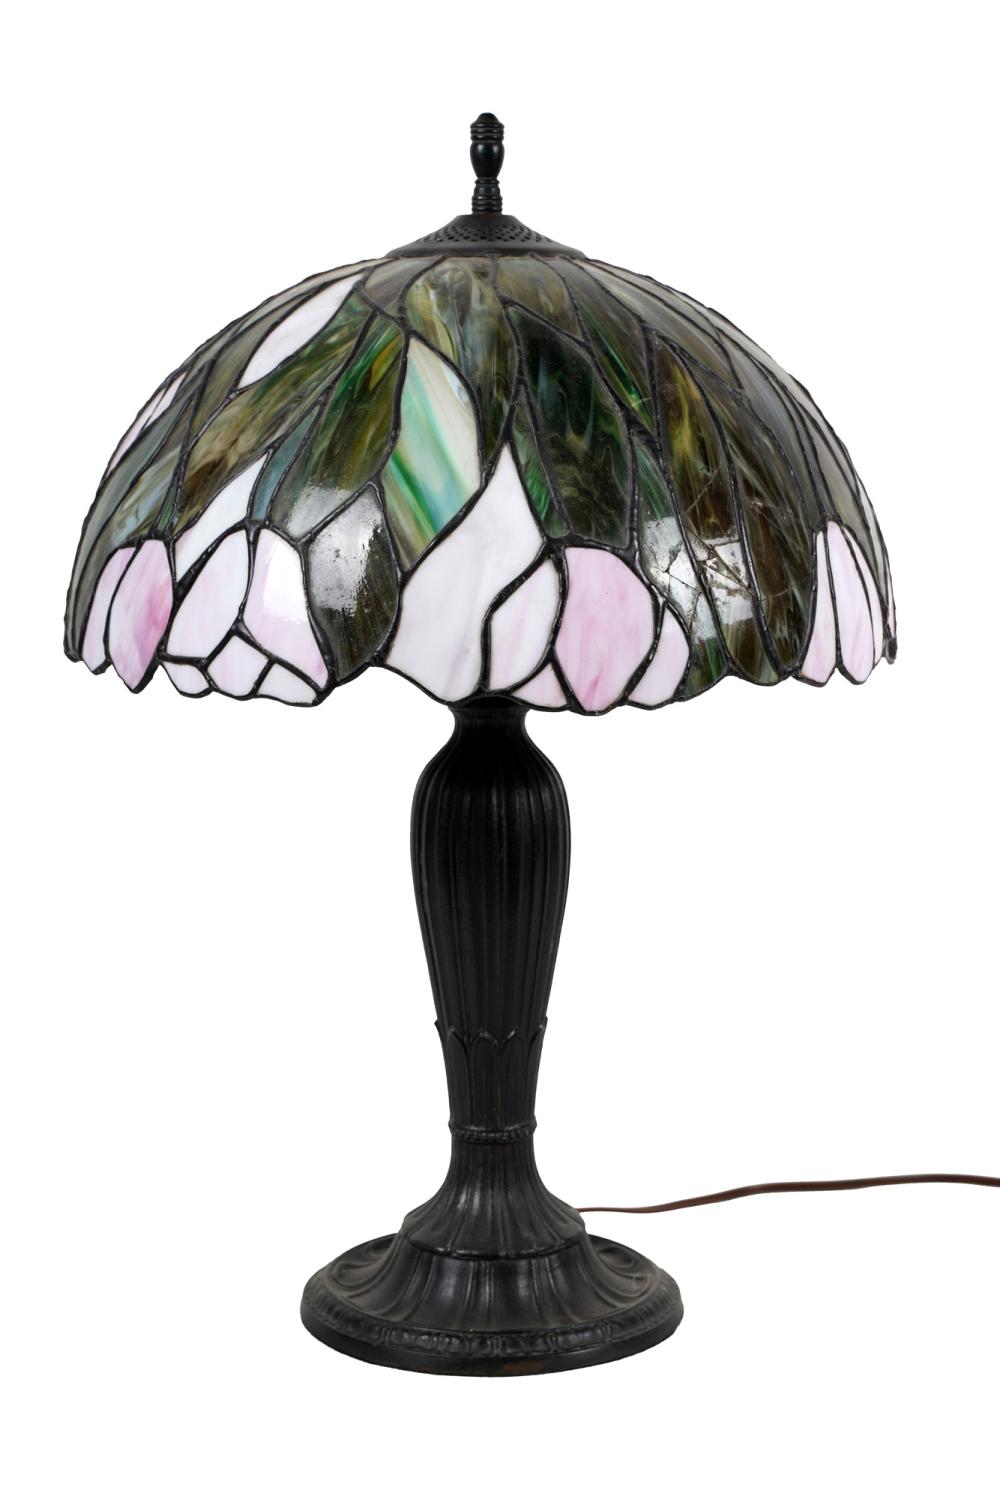 LEADED GLASS TABLE LAMPCondition: